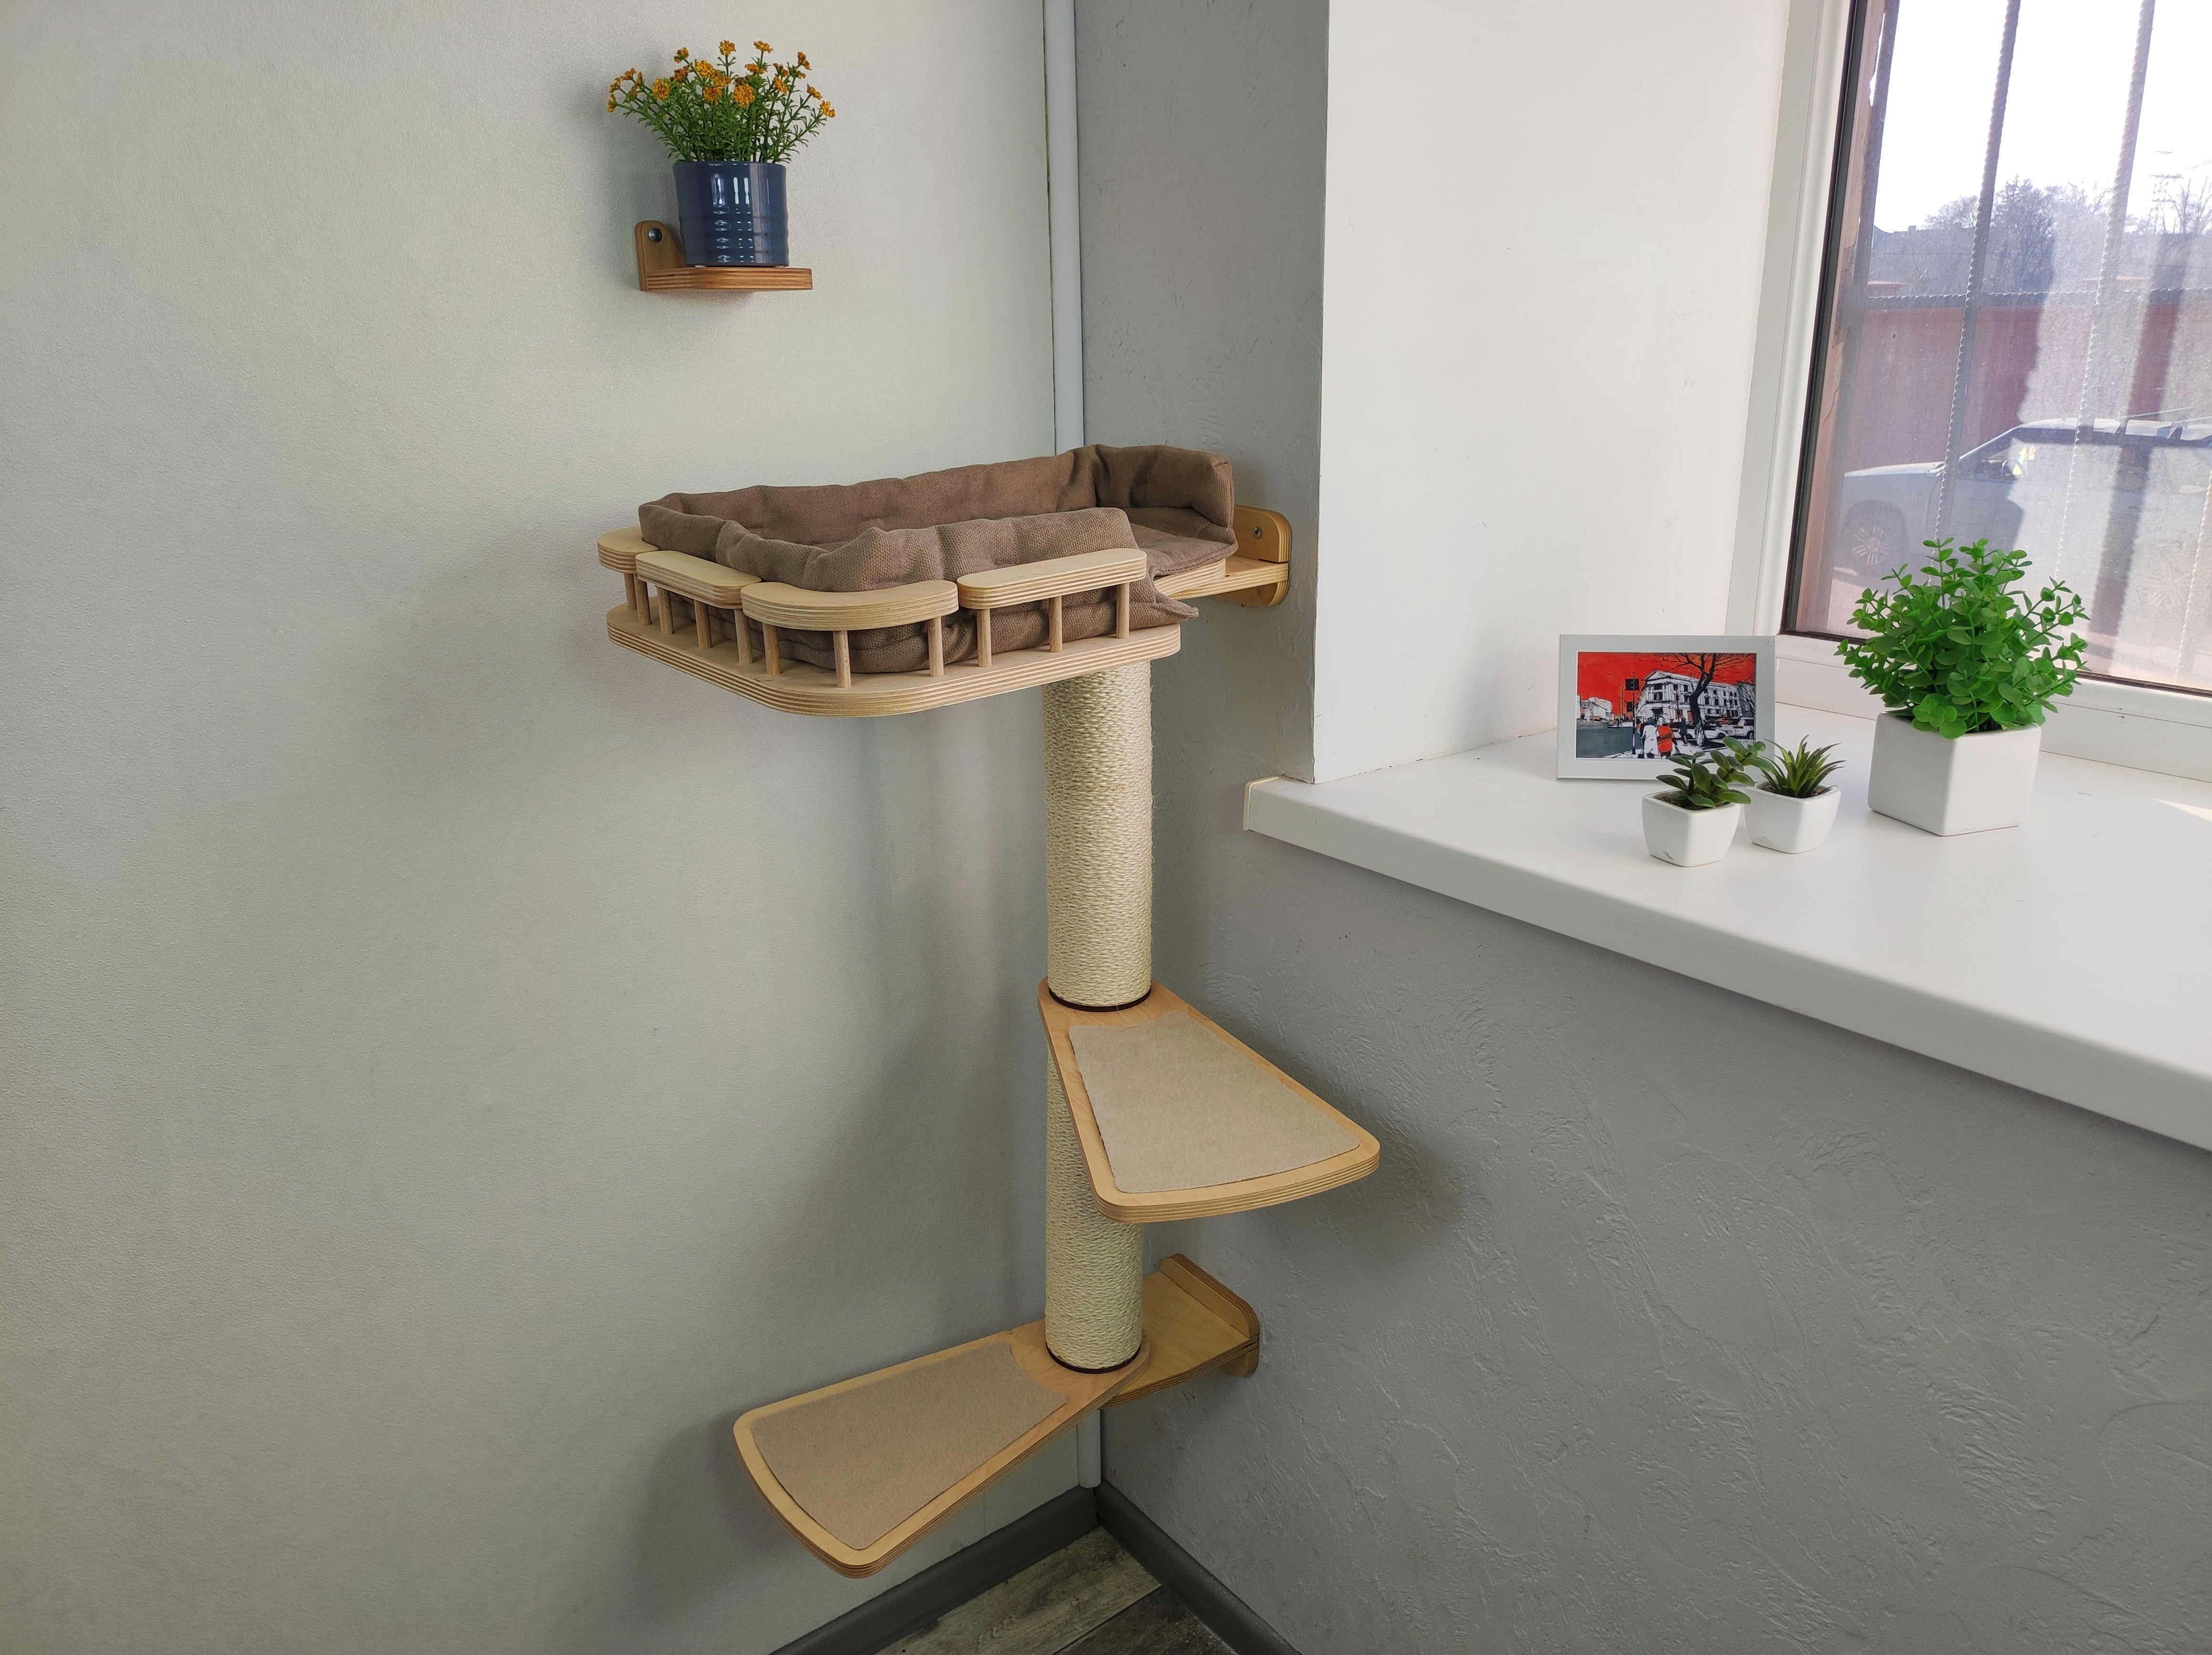 Cat wall mounted window shelf with scratching post